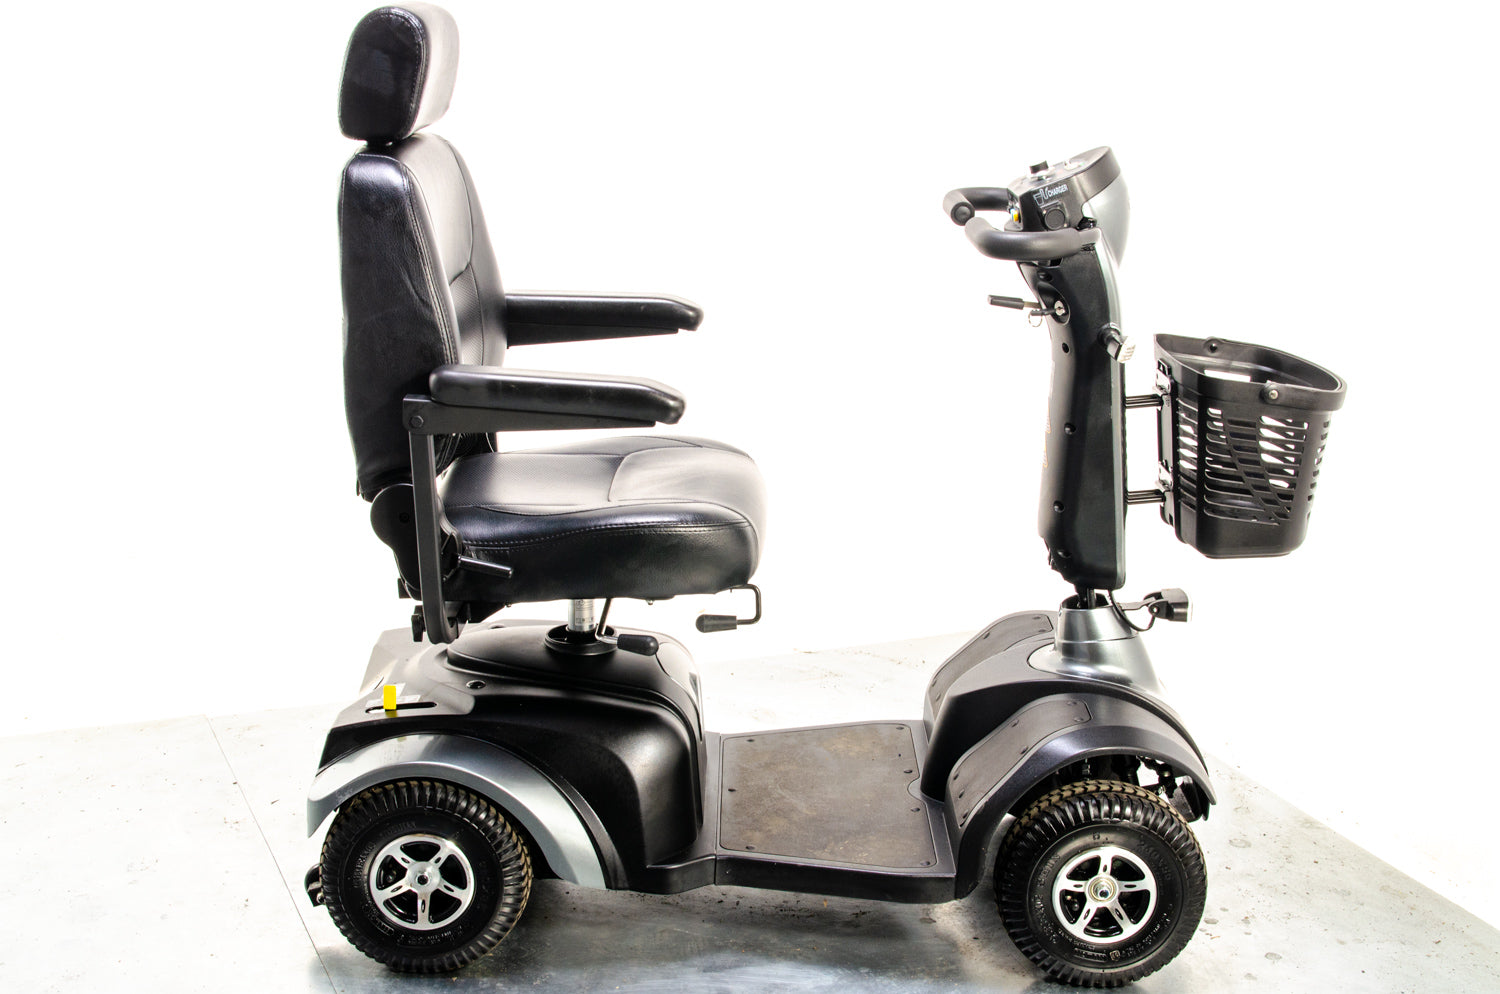 Van Os Excel Roadster DX8 Used Mobility Scooter 8mph Midsize Pneumatic Tyres Road Pavement 13503